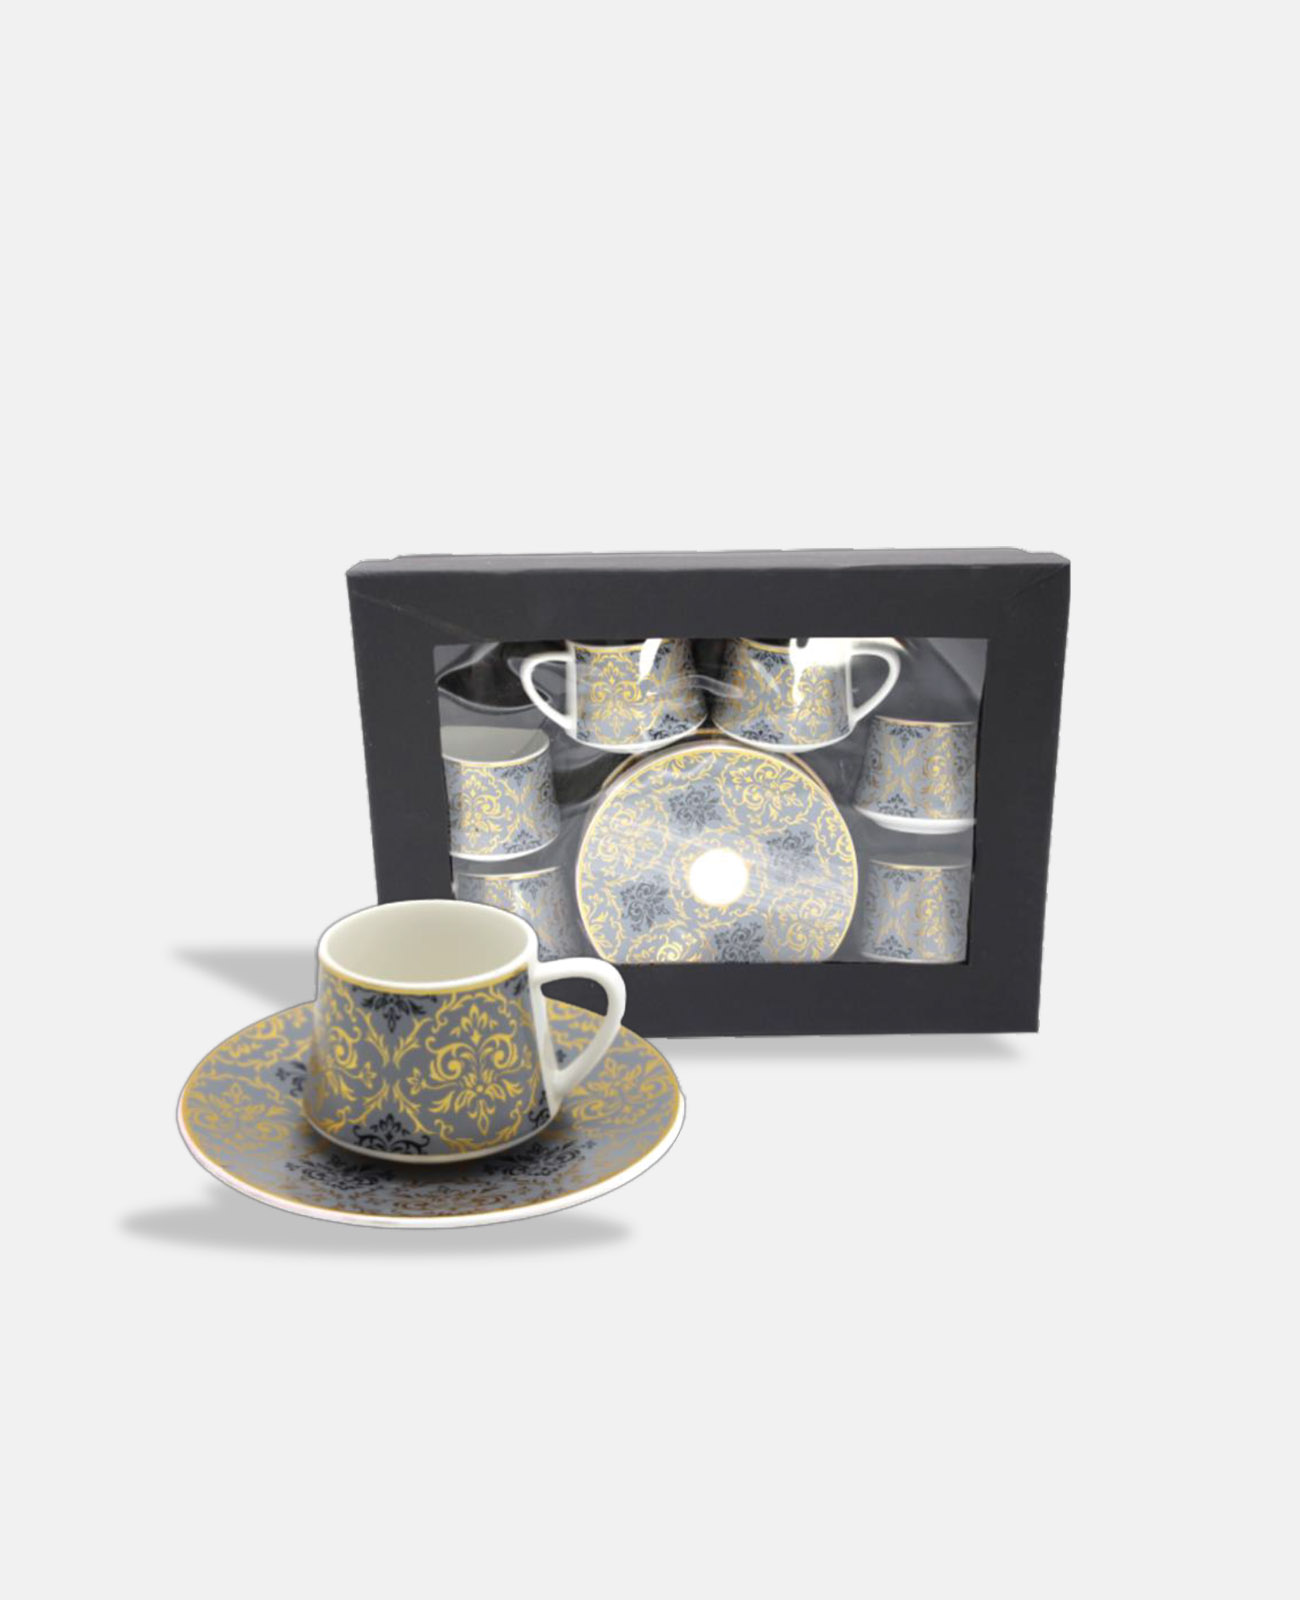 Narrow Mouth Golden and Black Thin Print Porcelain Coffee Cups Set - 6 Pieces/H 1-43